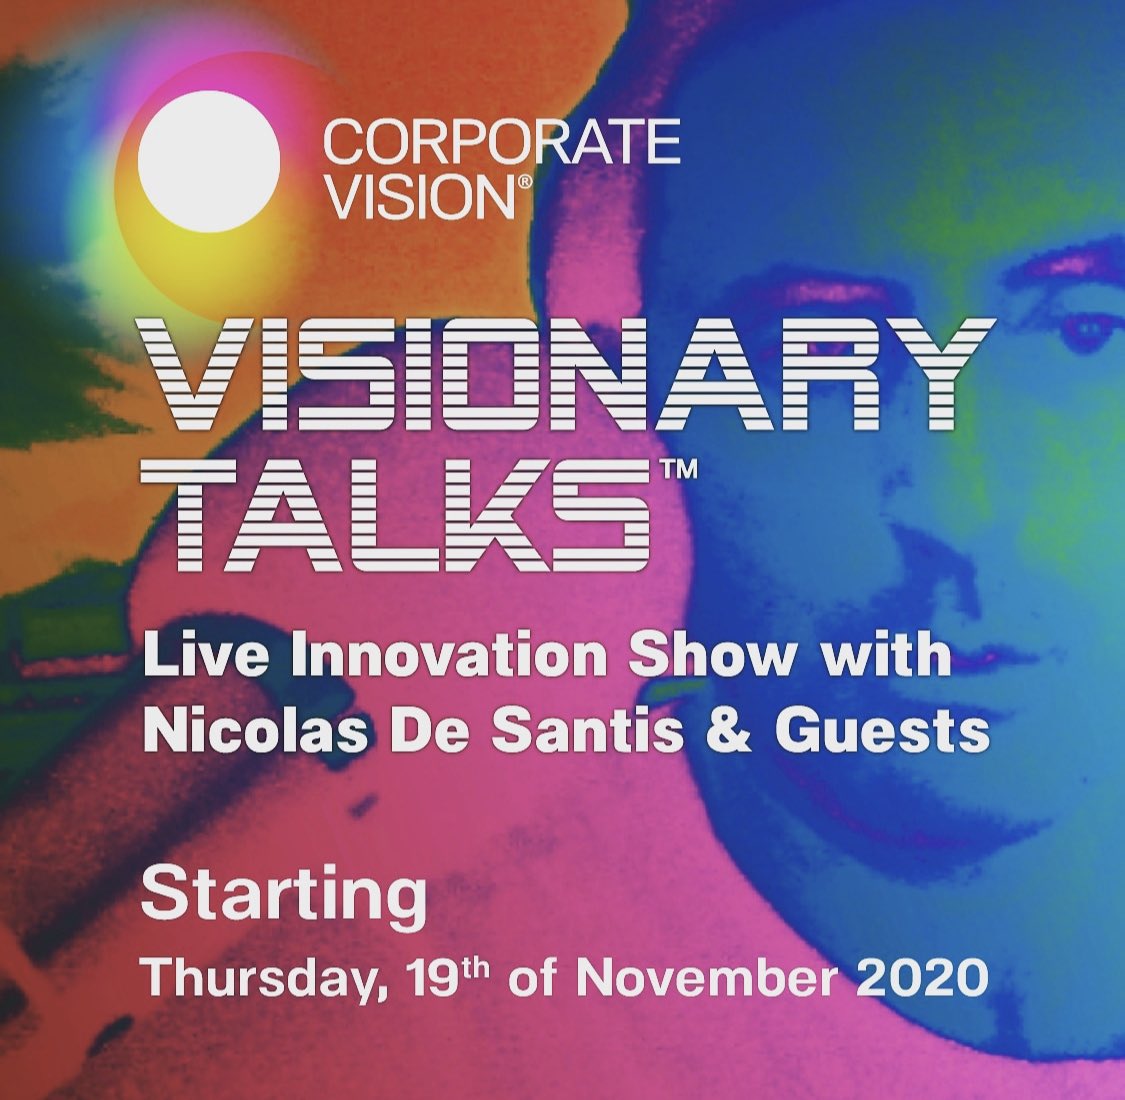 STARTING November 19th #visionarytalks global LIVE show starts 5pm London with amazing special guests in #business #strategy #disruption #technology #innovation #creativity #sustainability #culture and #socialissues TIME FOR VISION to join show register at corporatevision.io